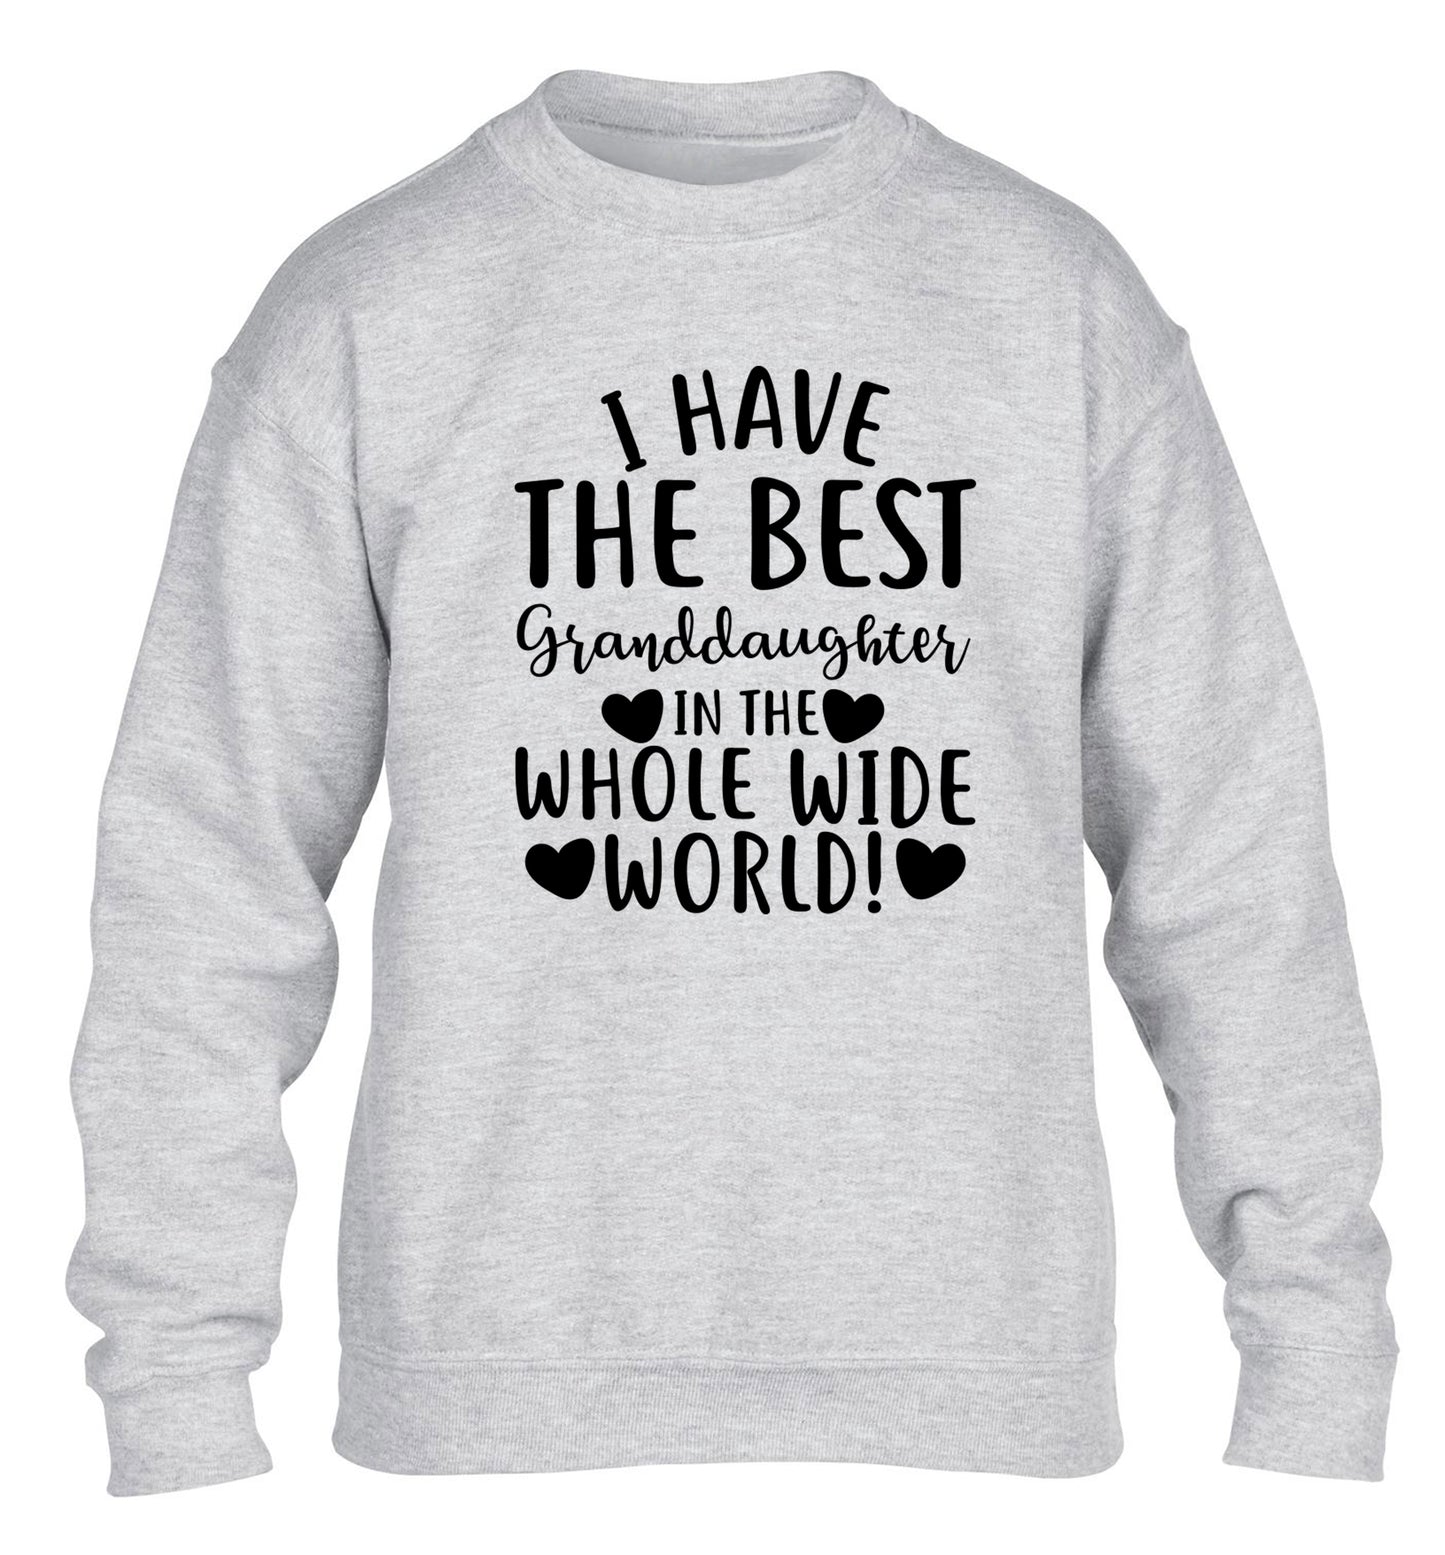 I have the best granddaughter in the whole wide world! children's grey sweater 12-13 Years